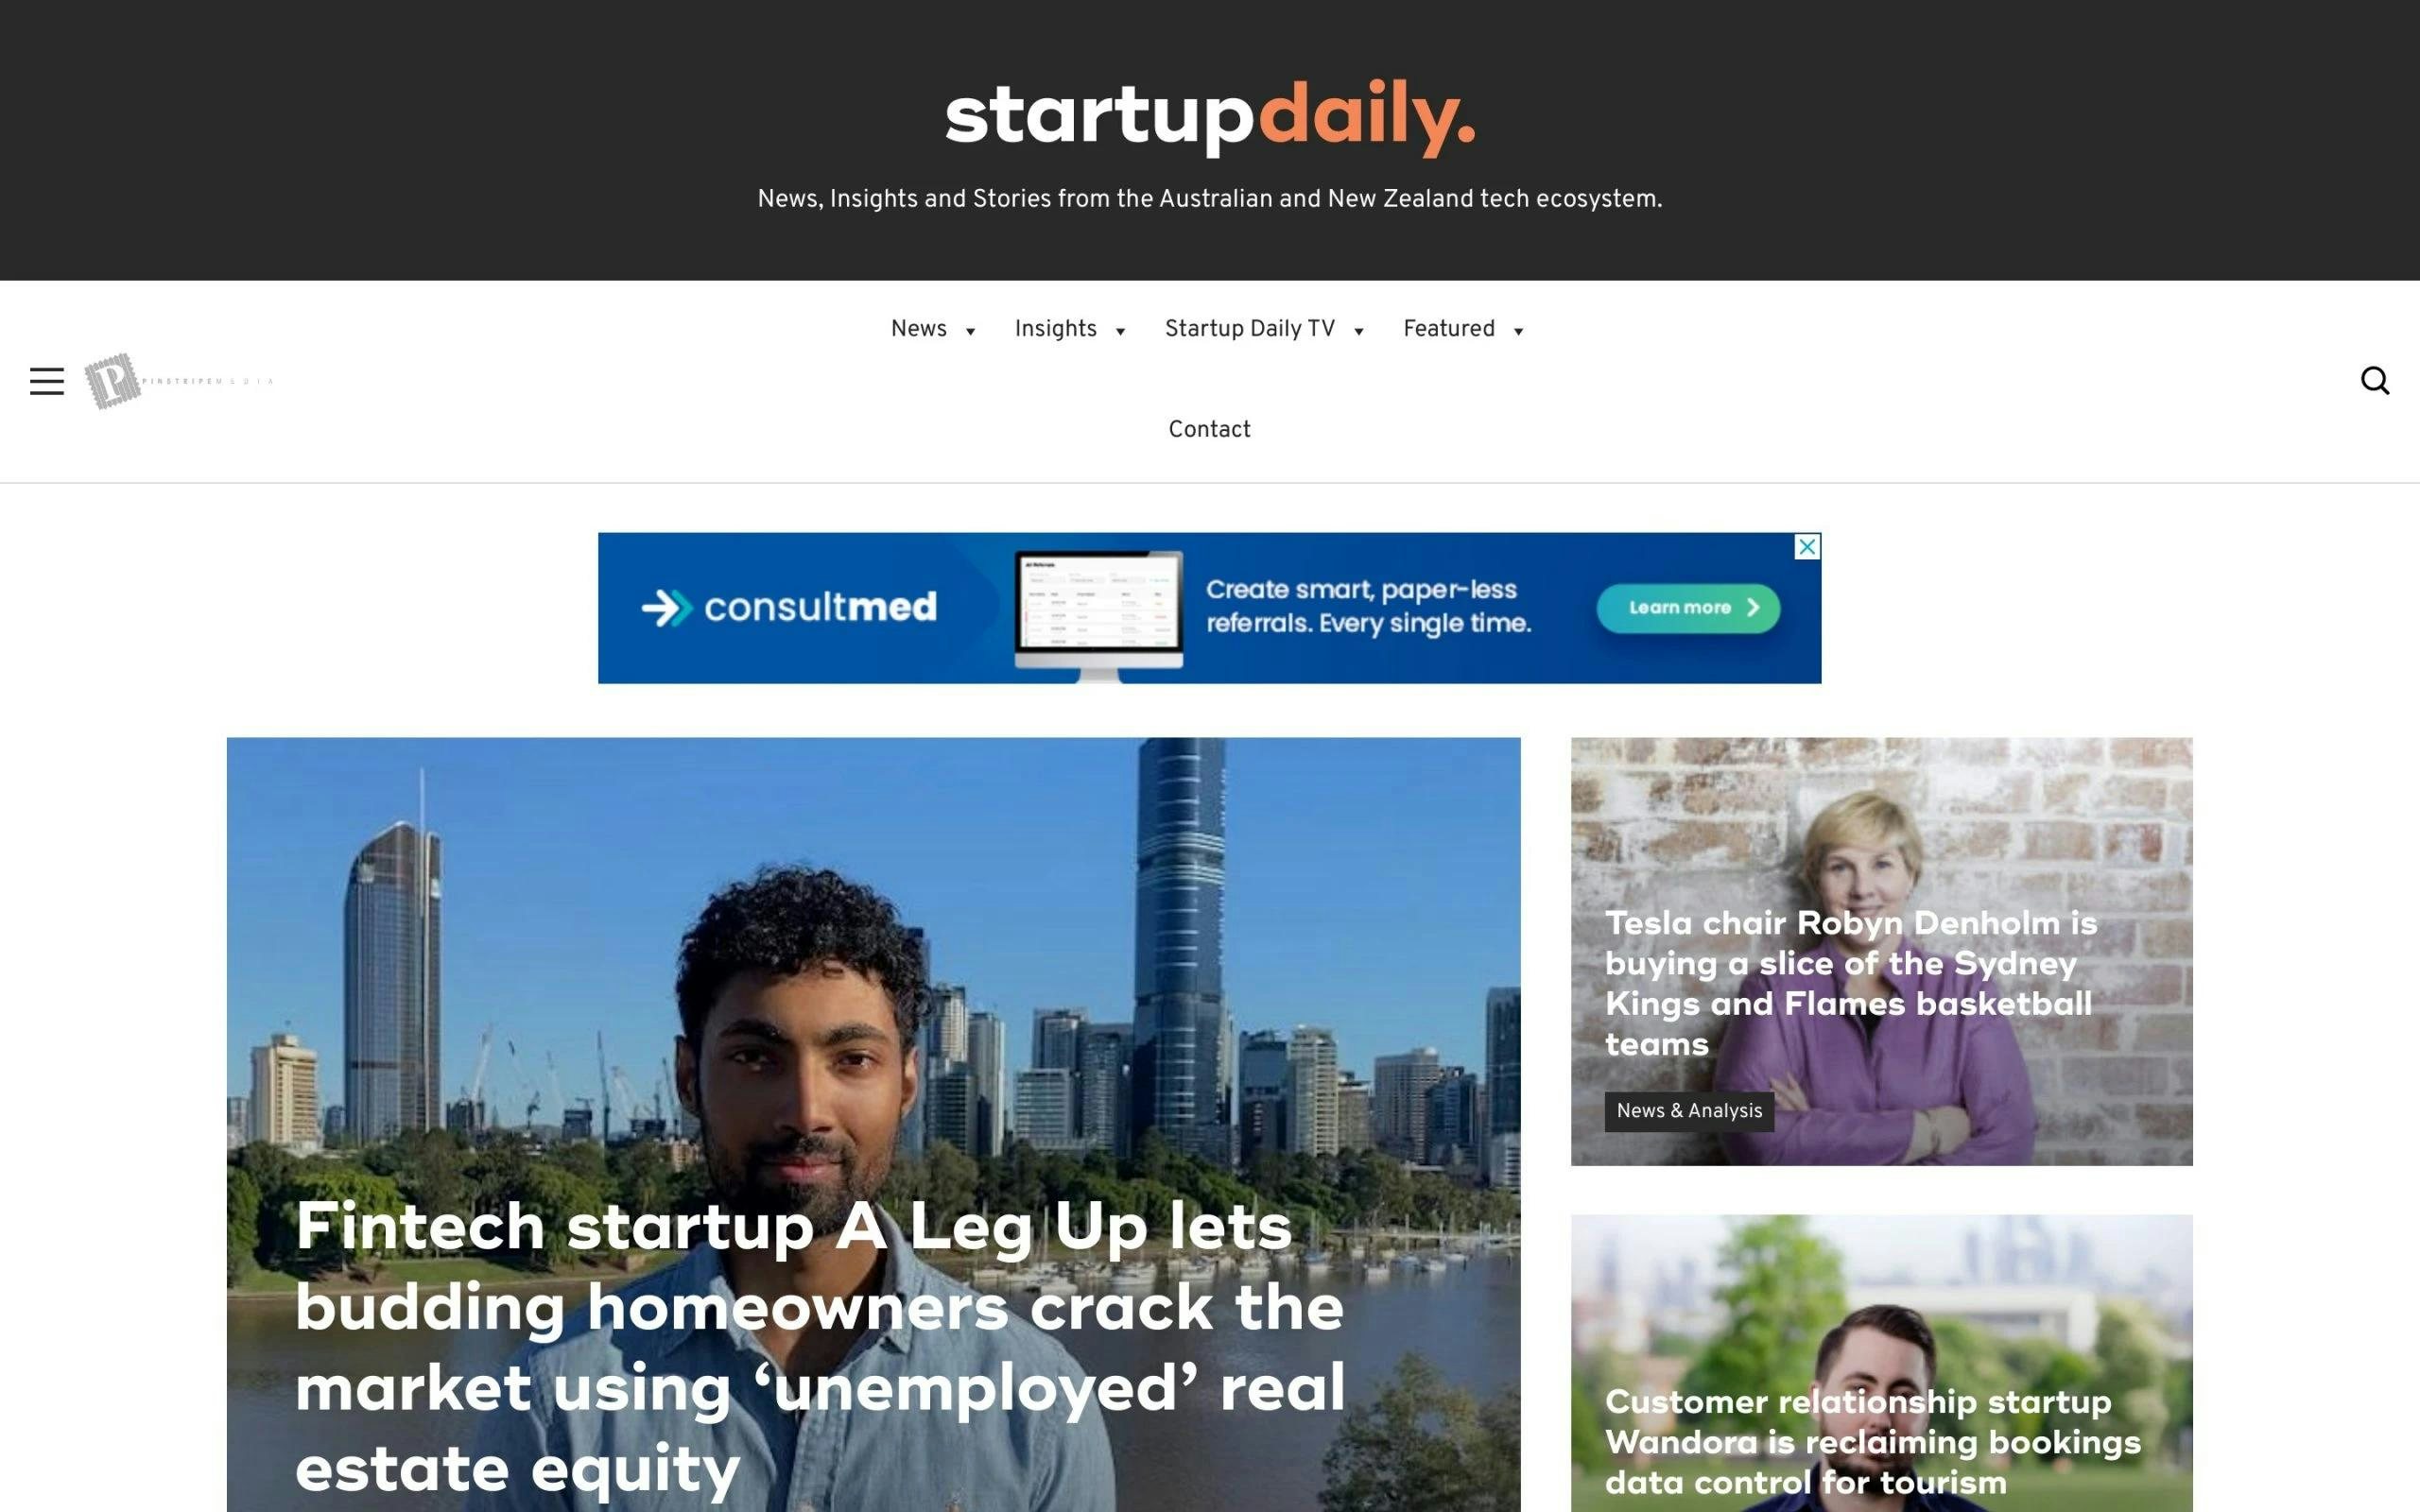 Startup Daily